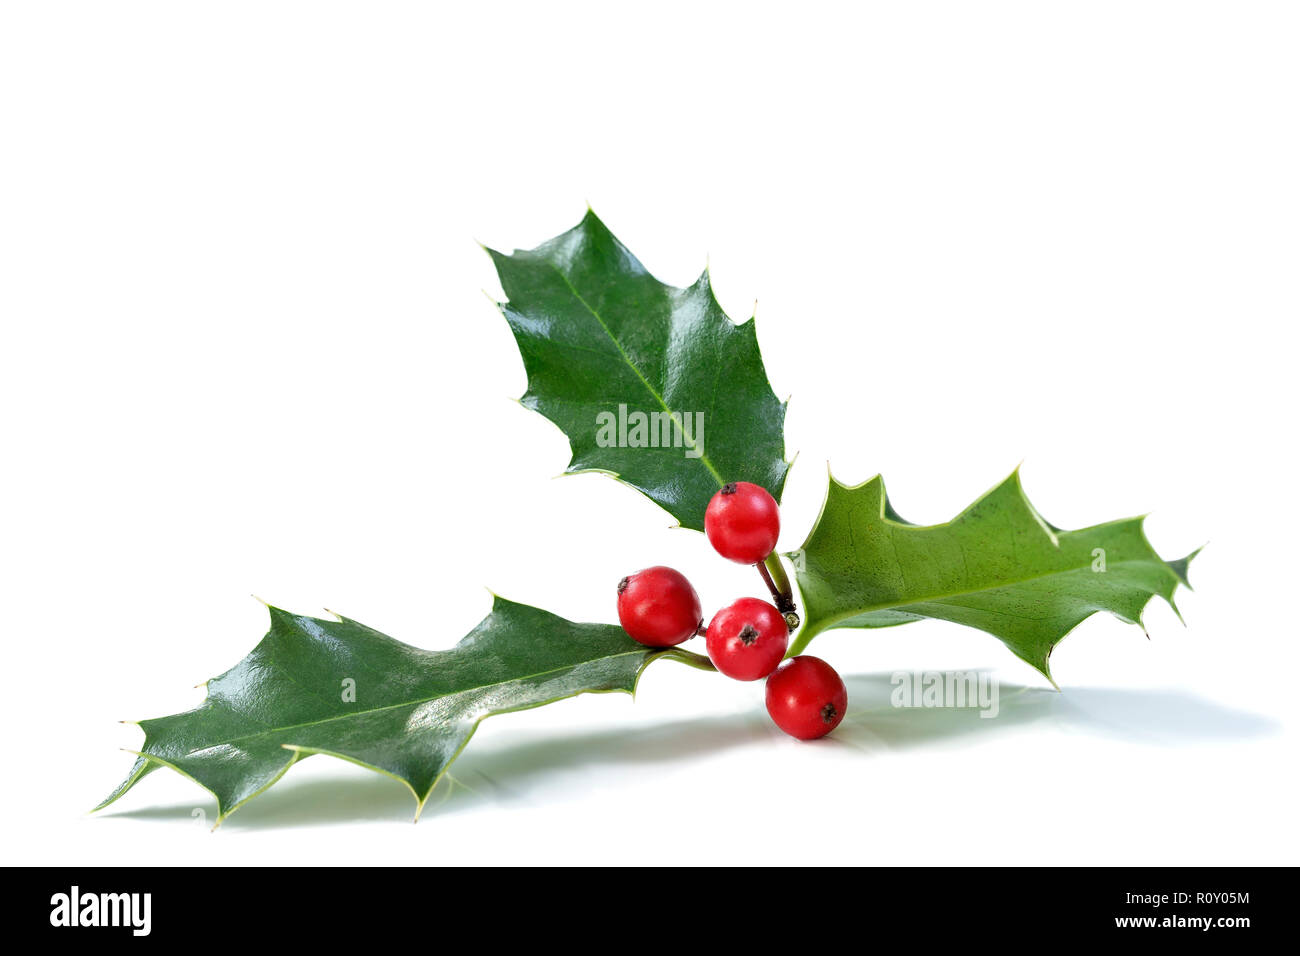 Christmas Holly With Red Berries. Traditional festive decoration. Holly branch with red berries on white background Stock Photo